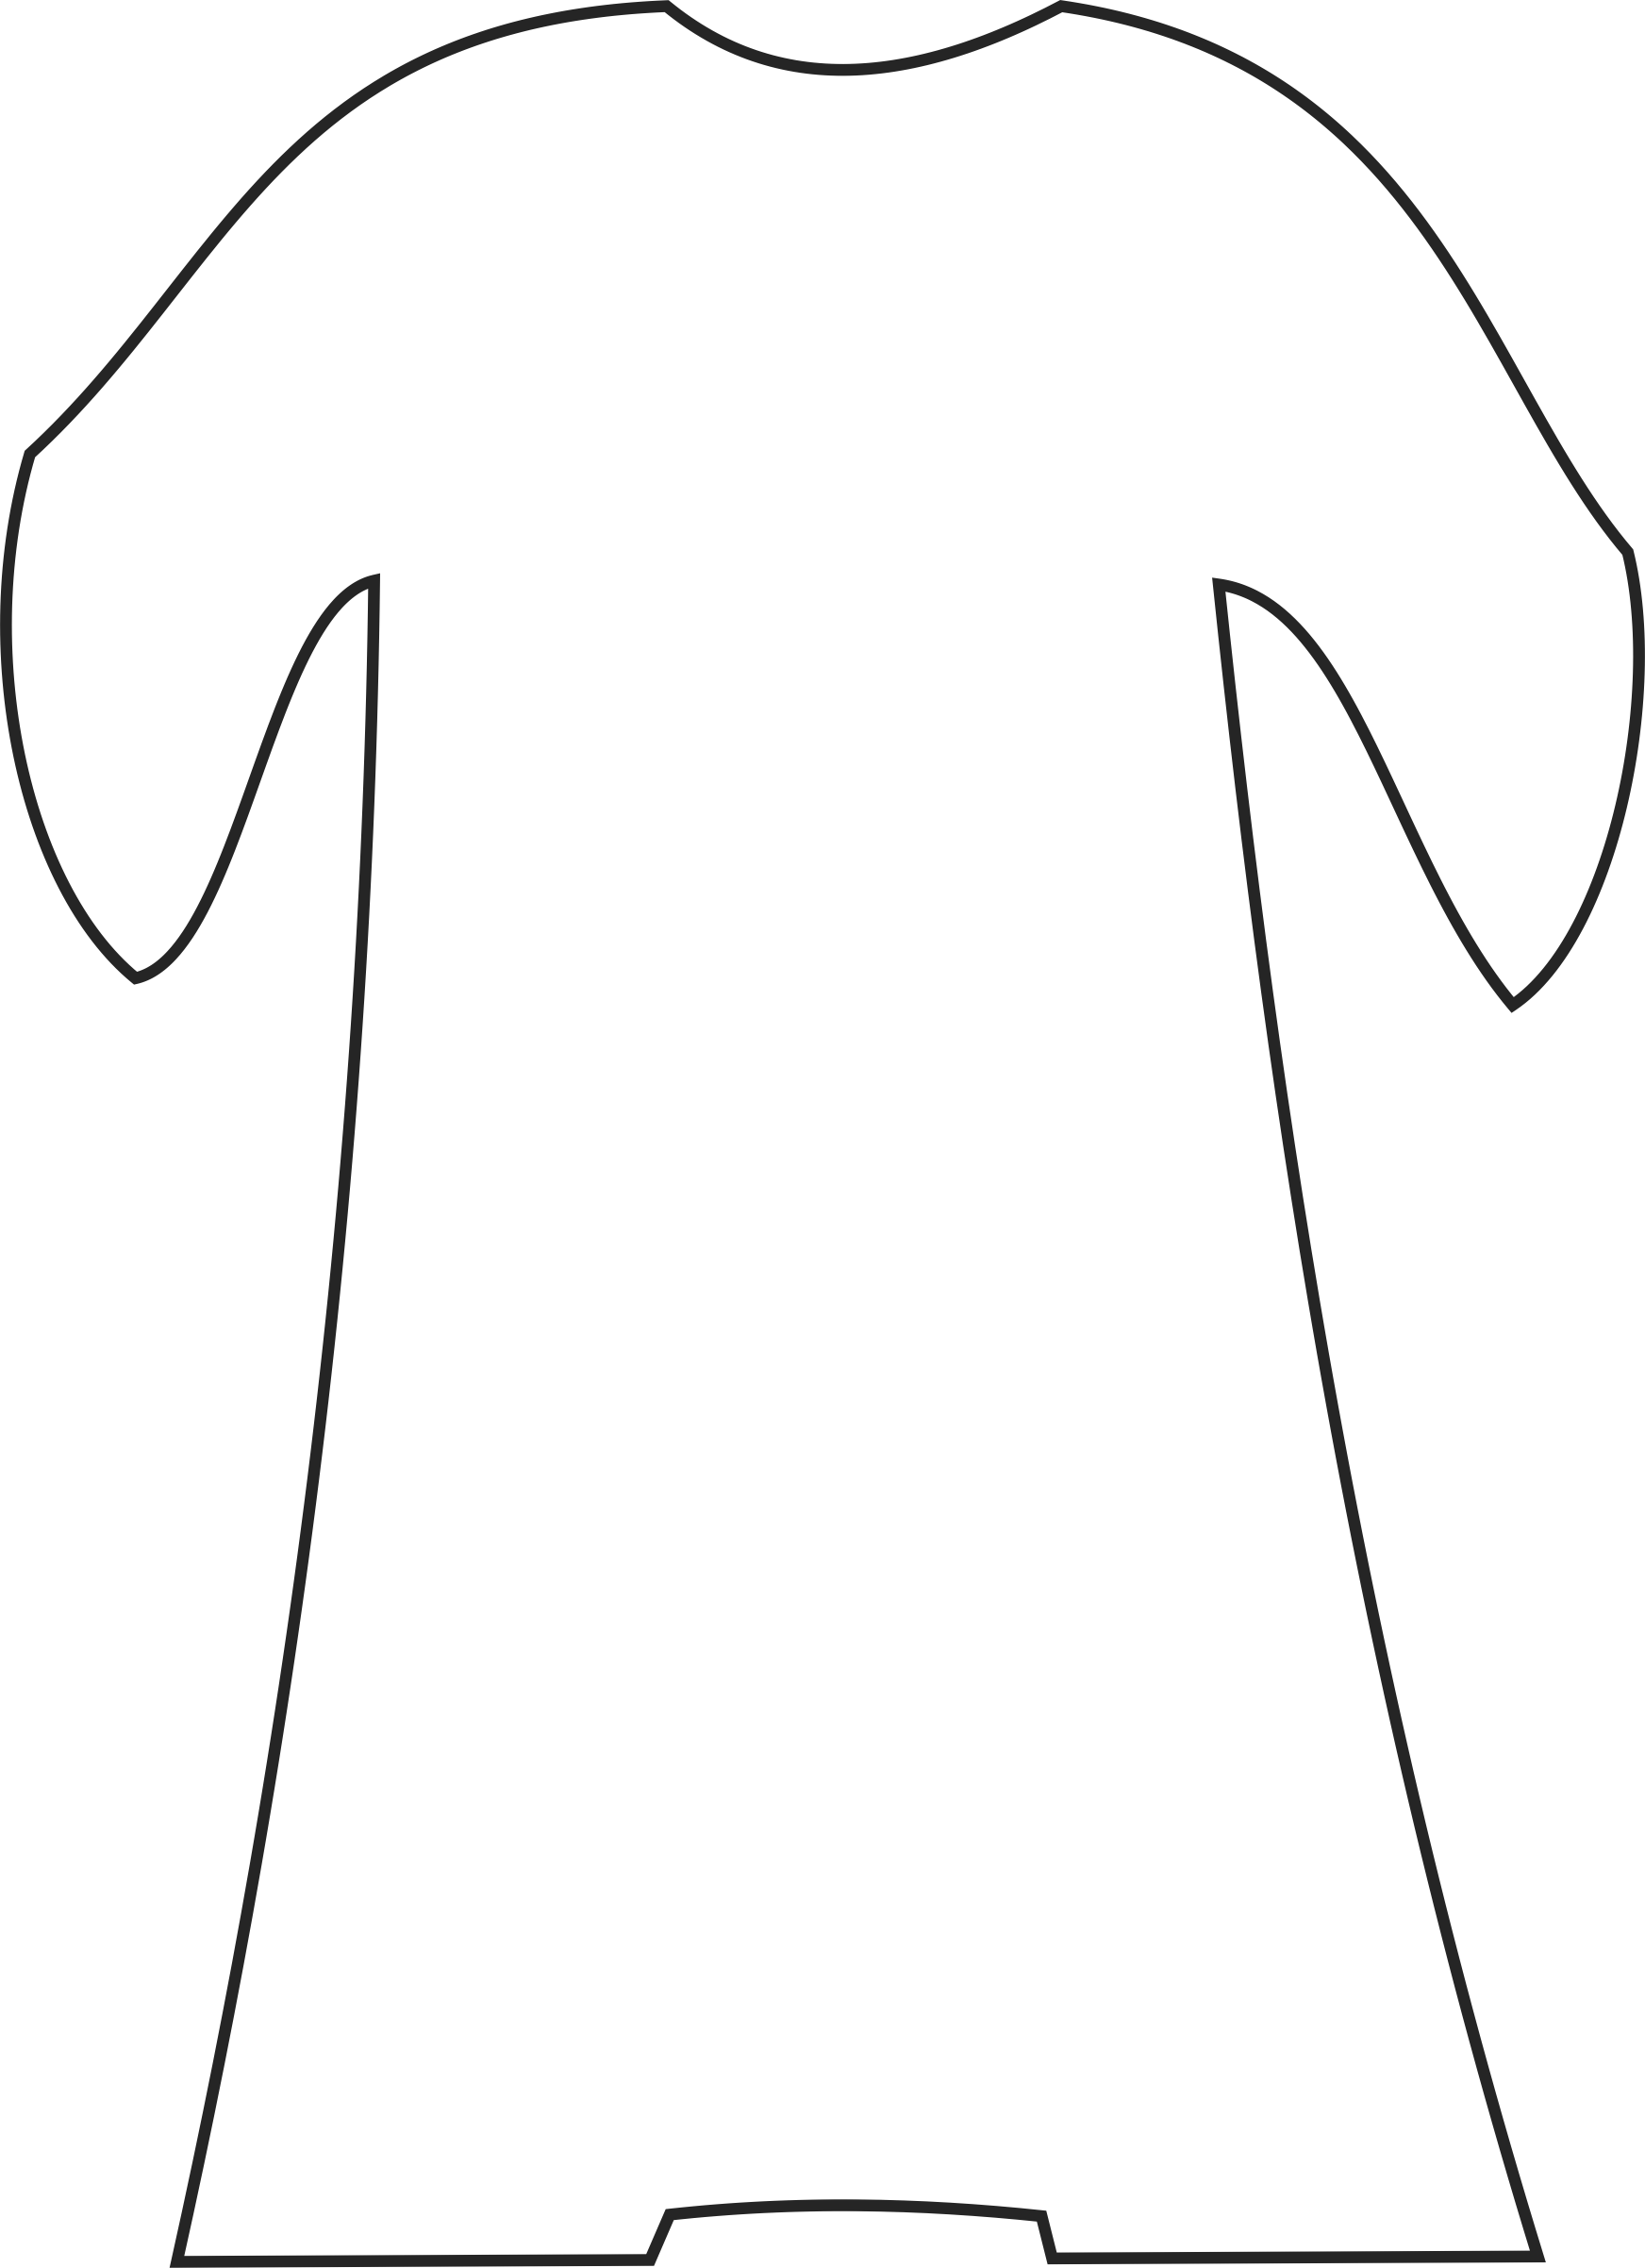 Free Josephs Coat Of Many Colors Coloring Page, Download Free Josephs